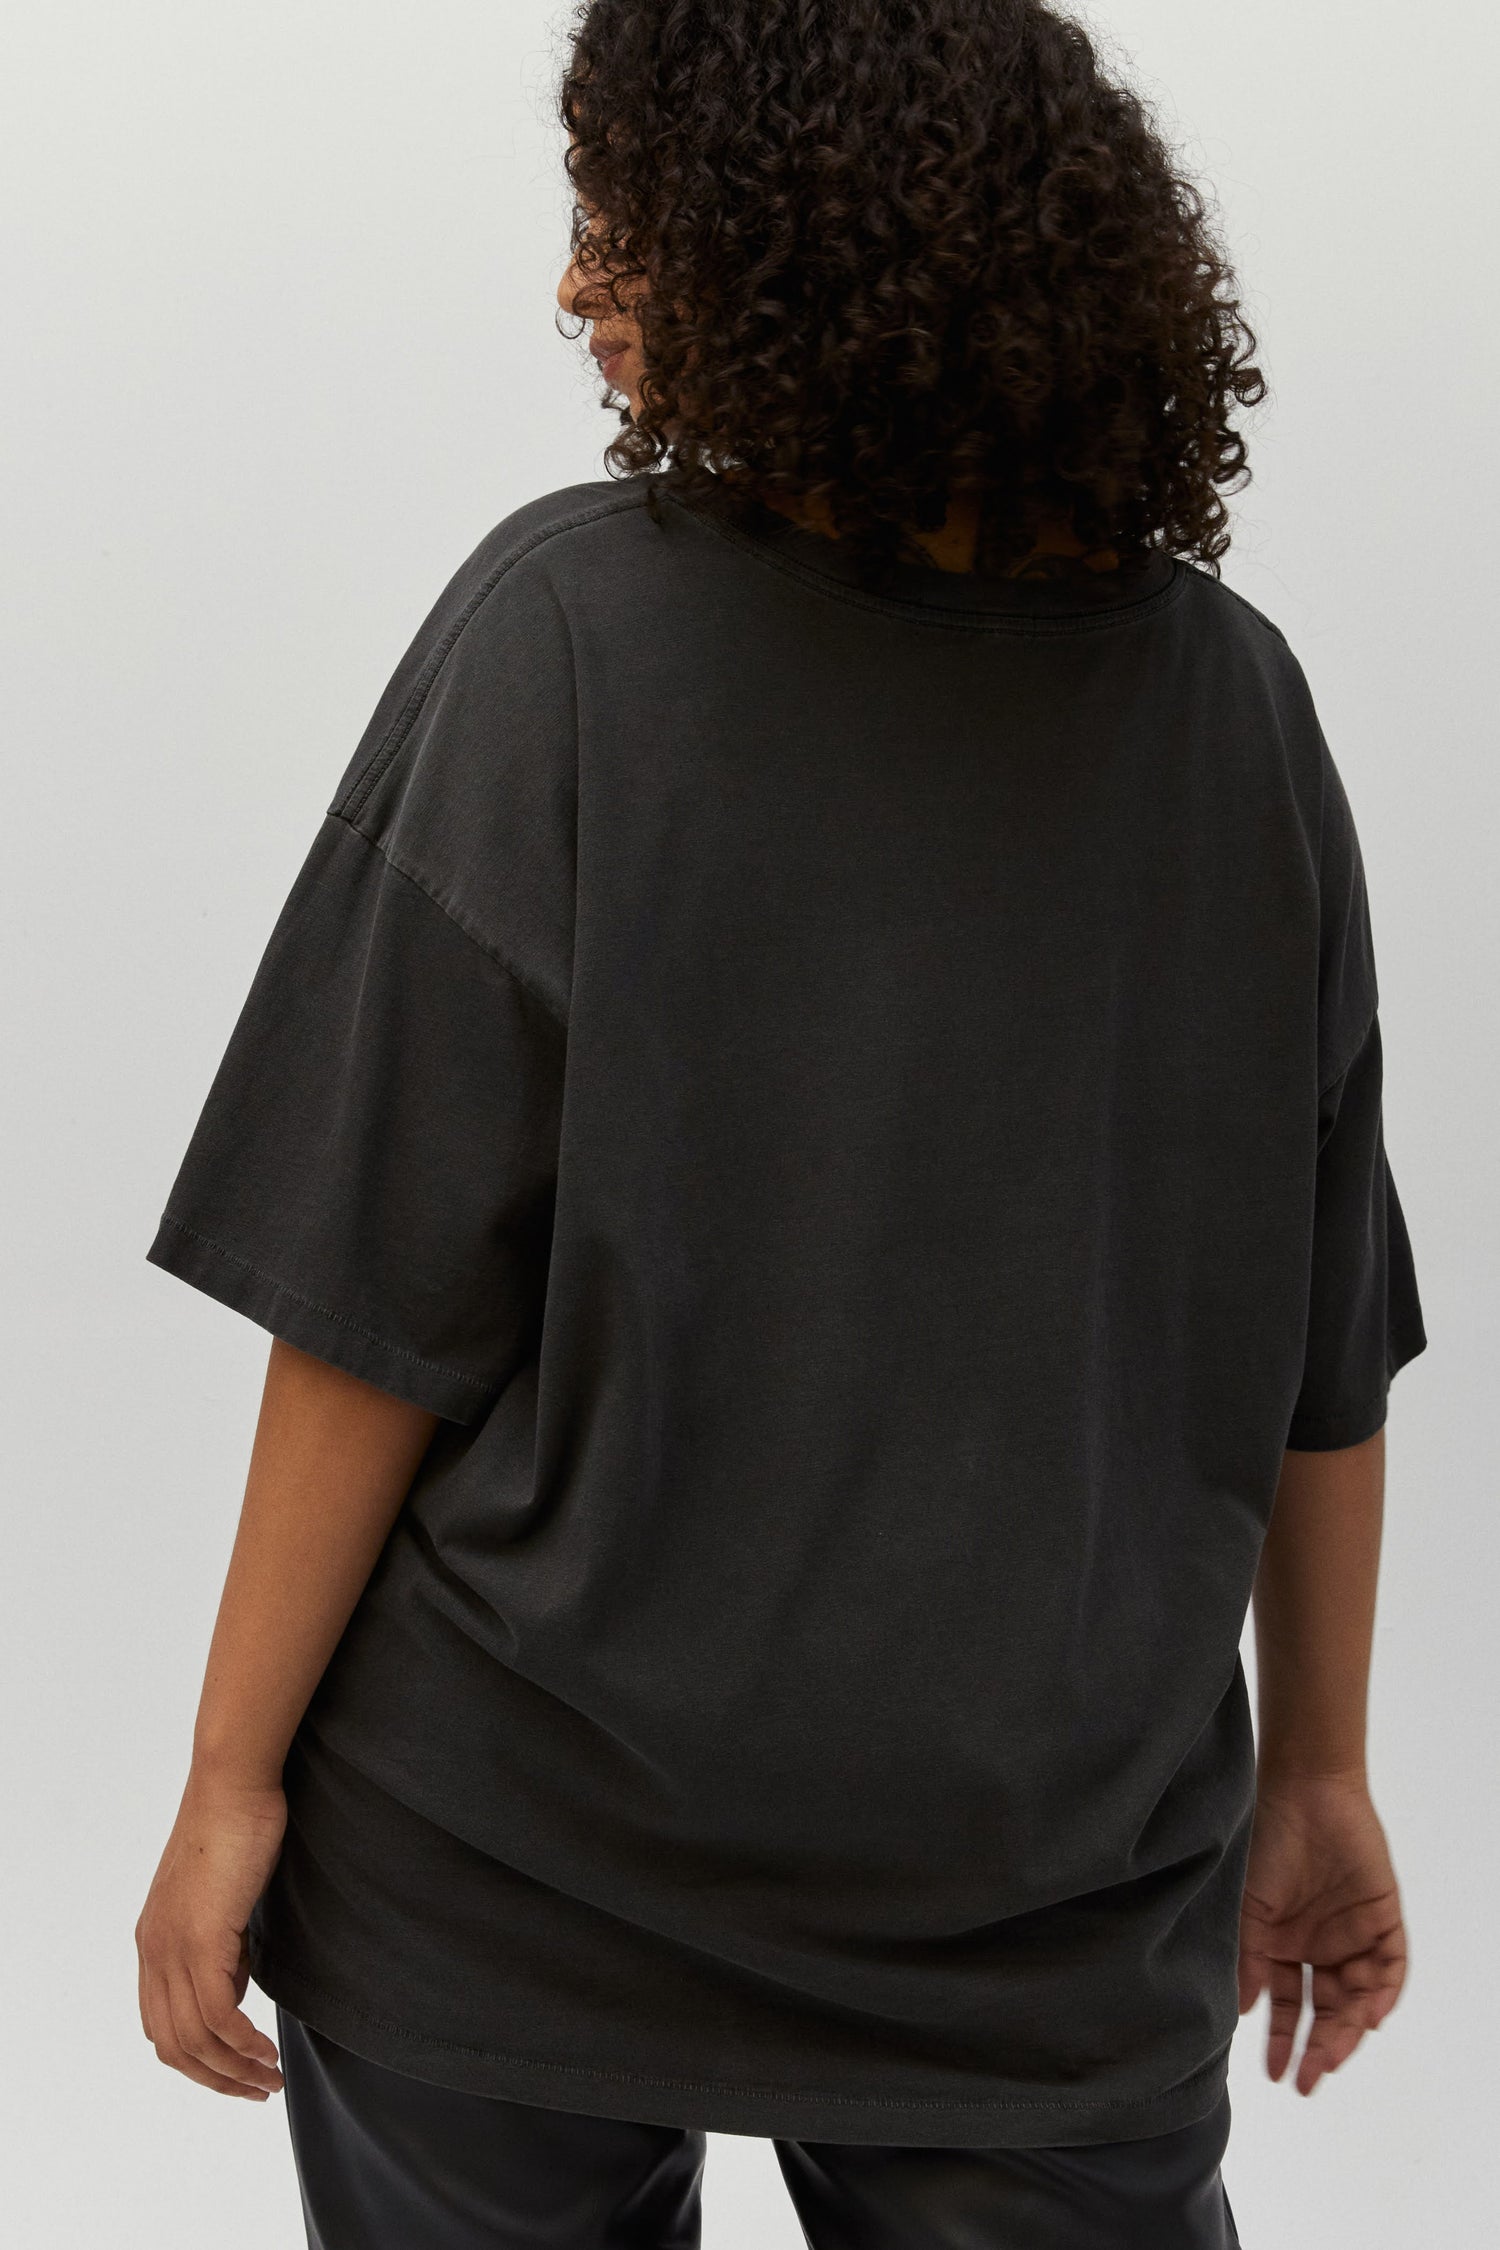 plus-size model featuring a black tee